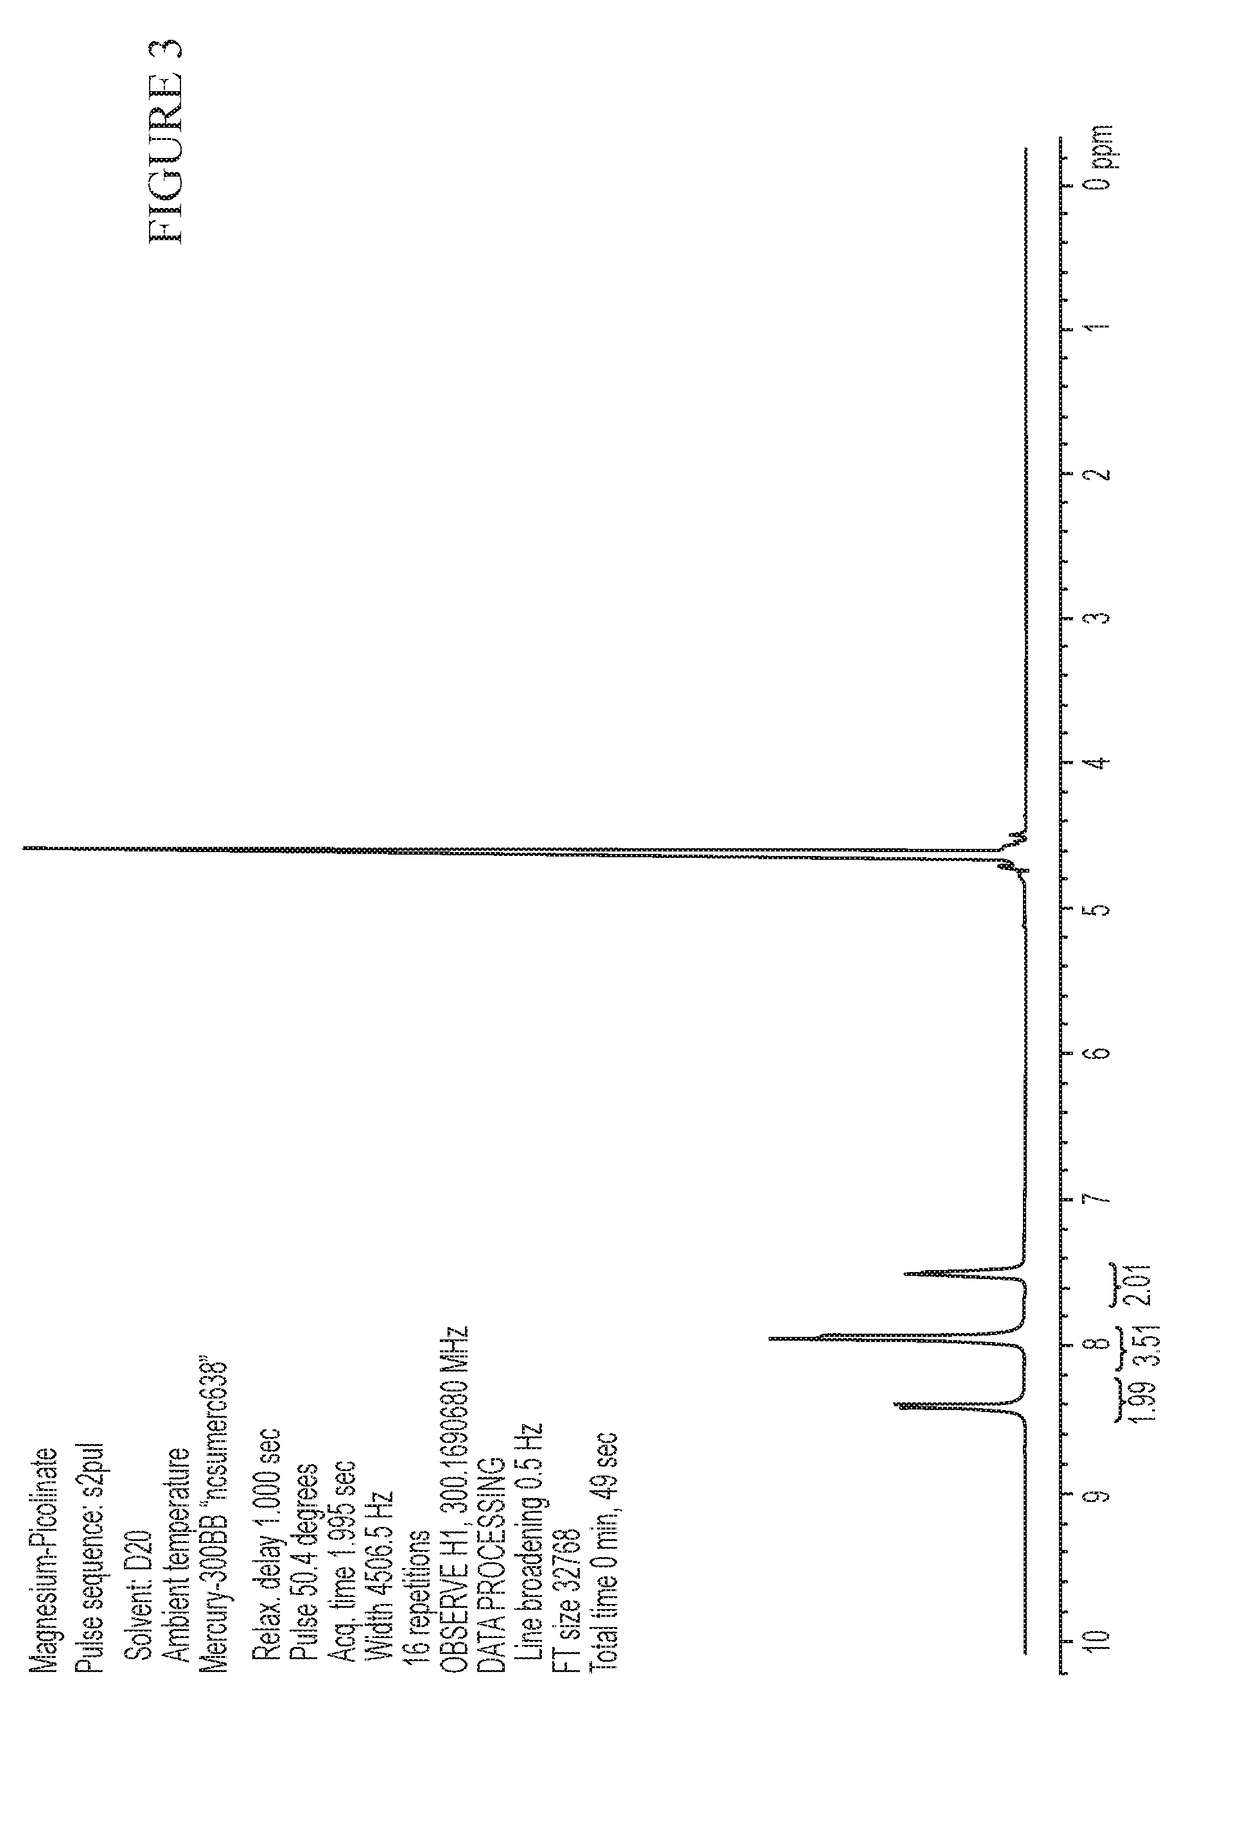 Magnesium picolinate compositions and methods of use